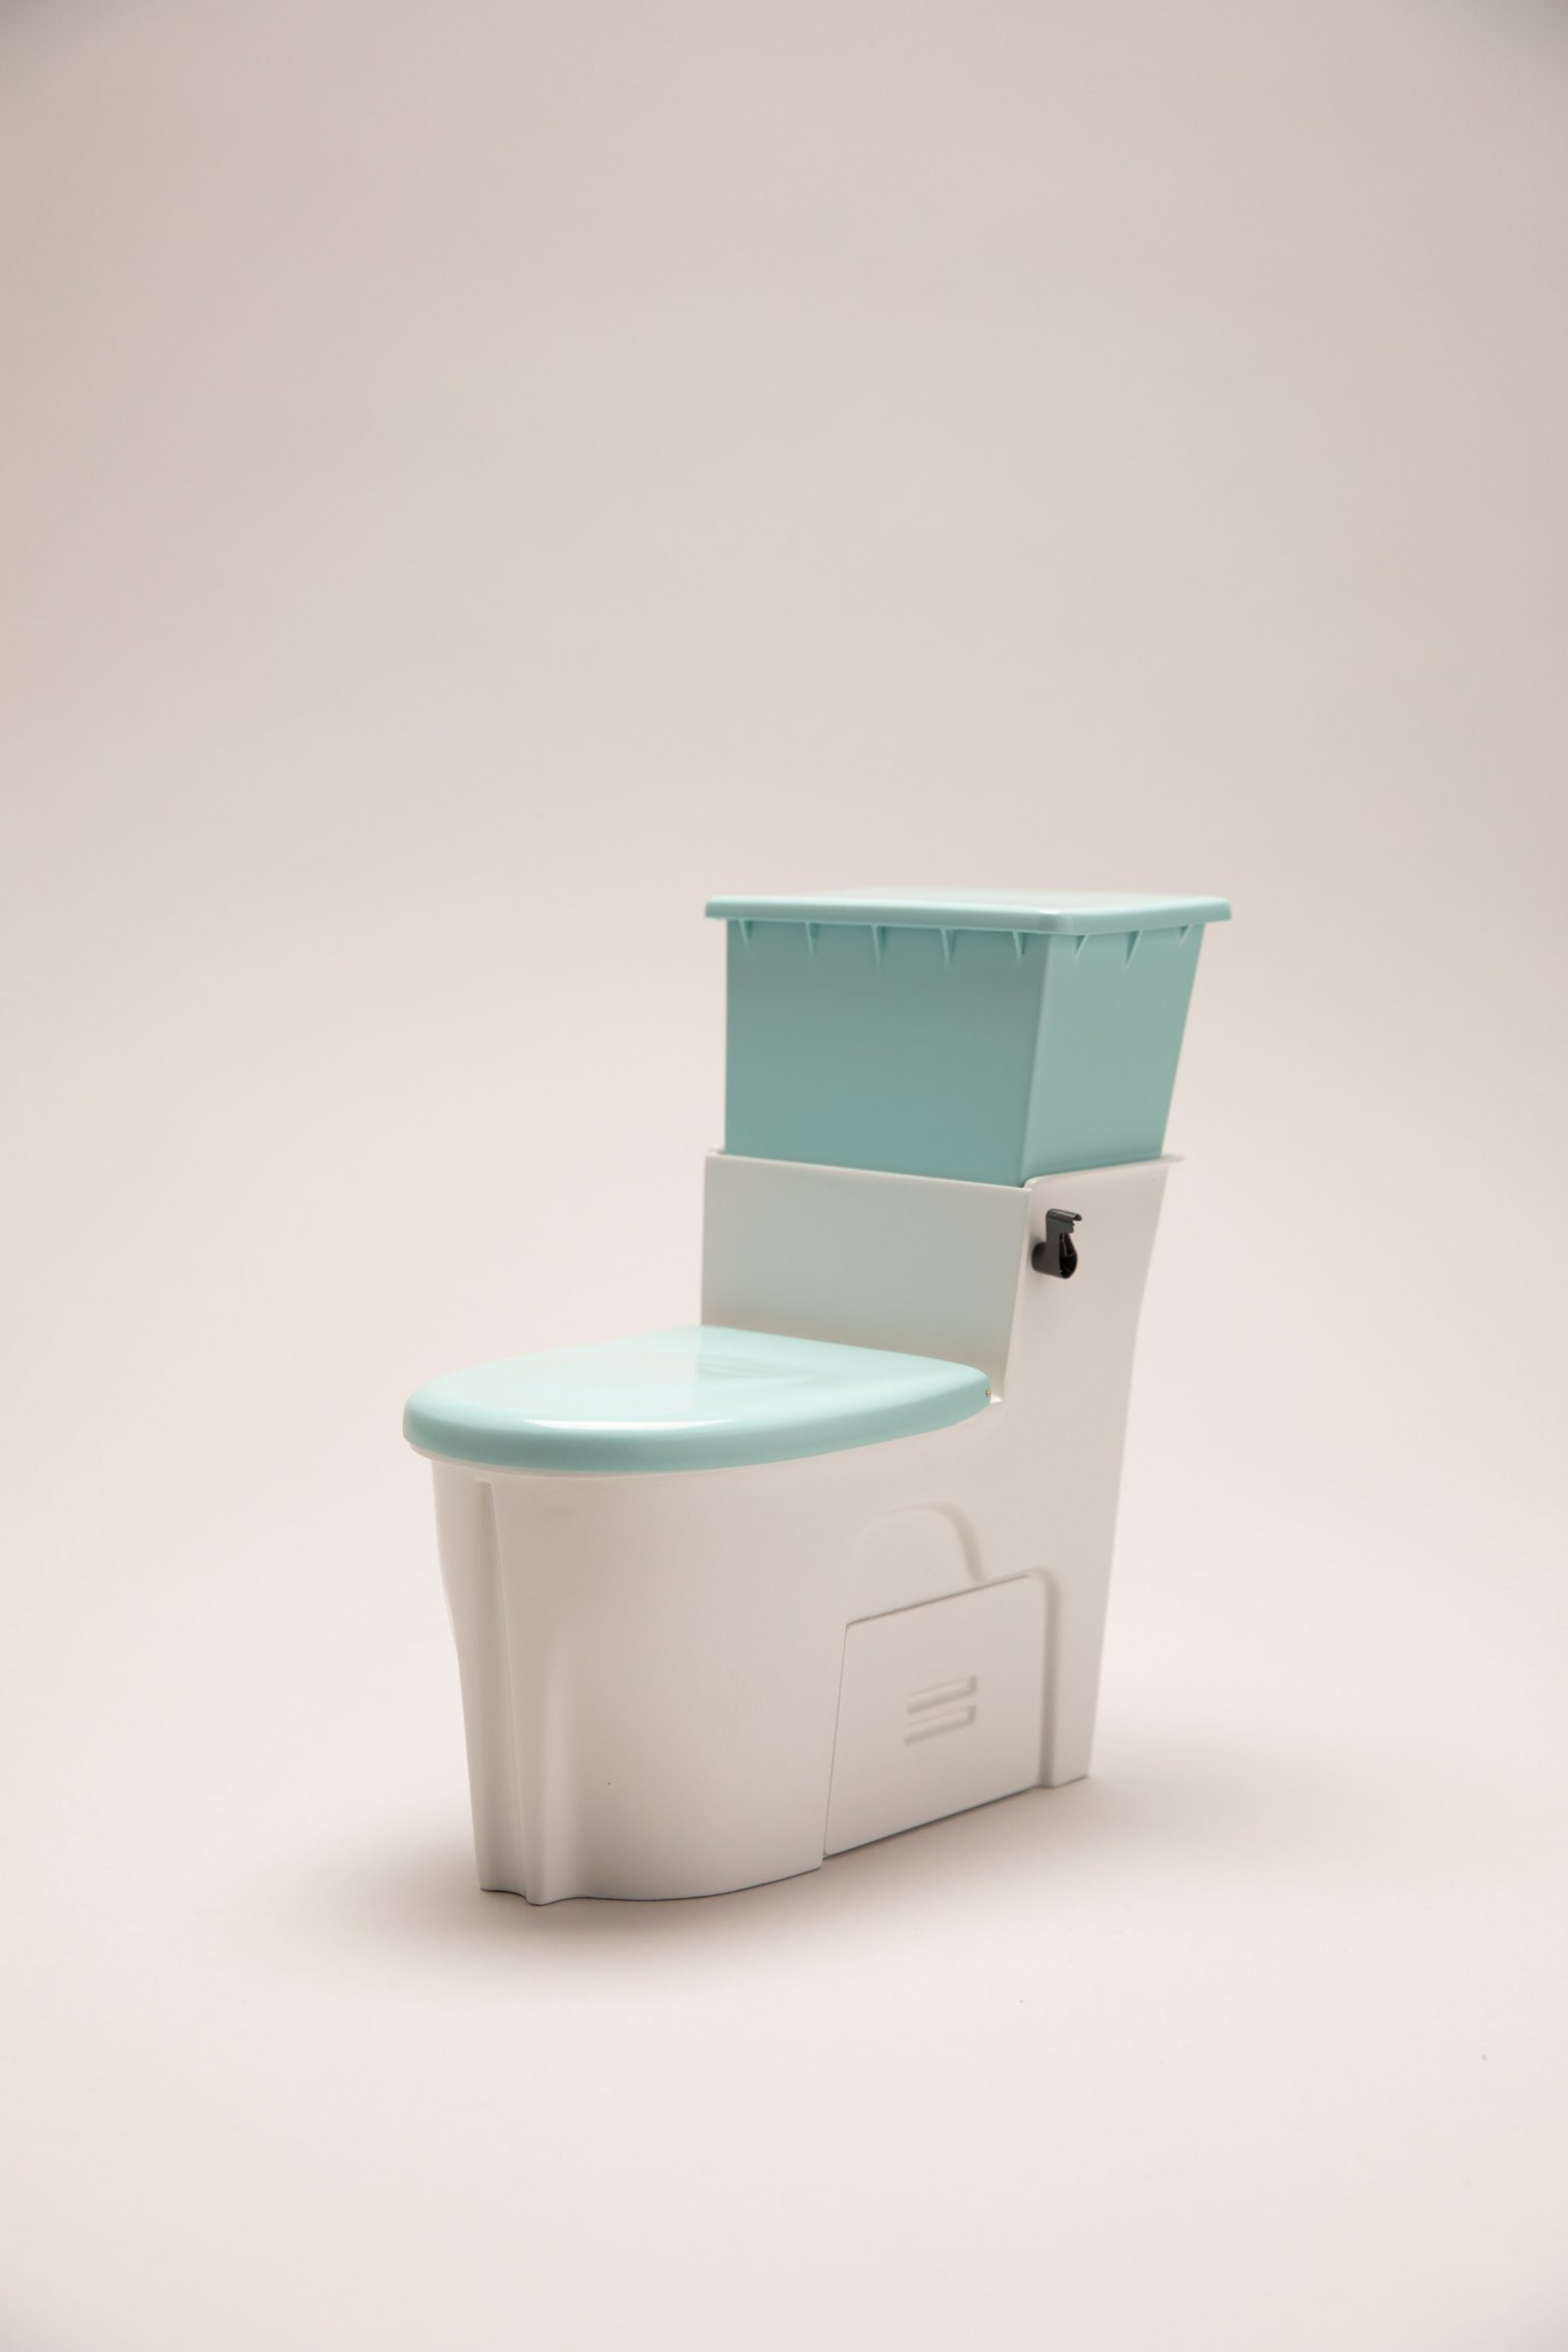 Scale model of a toilet made of white and aqua-coloured plastic